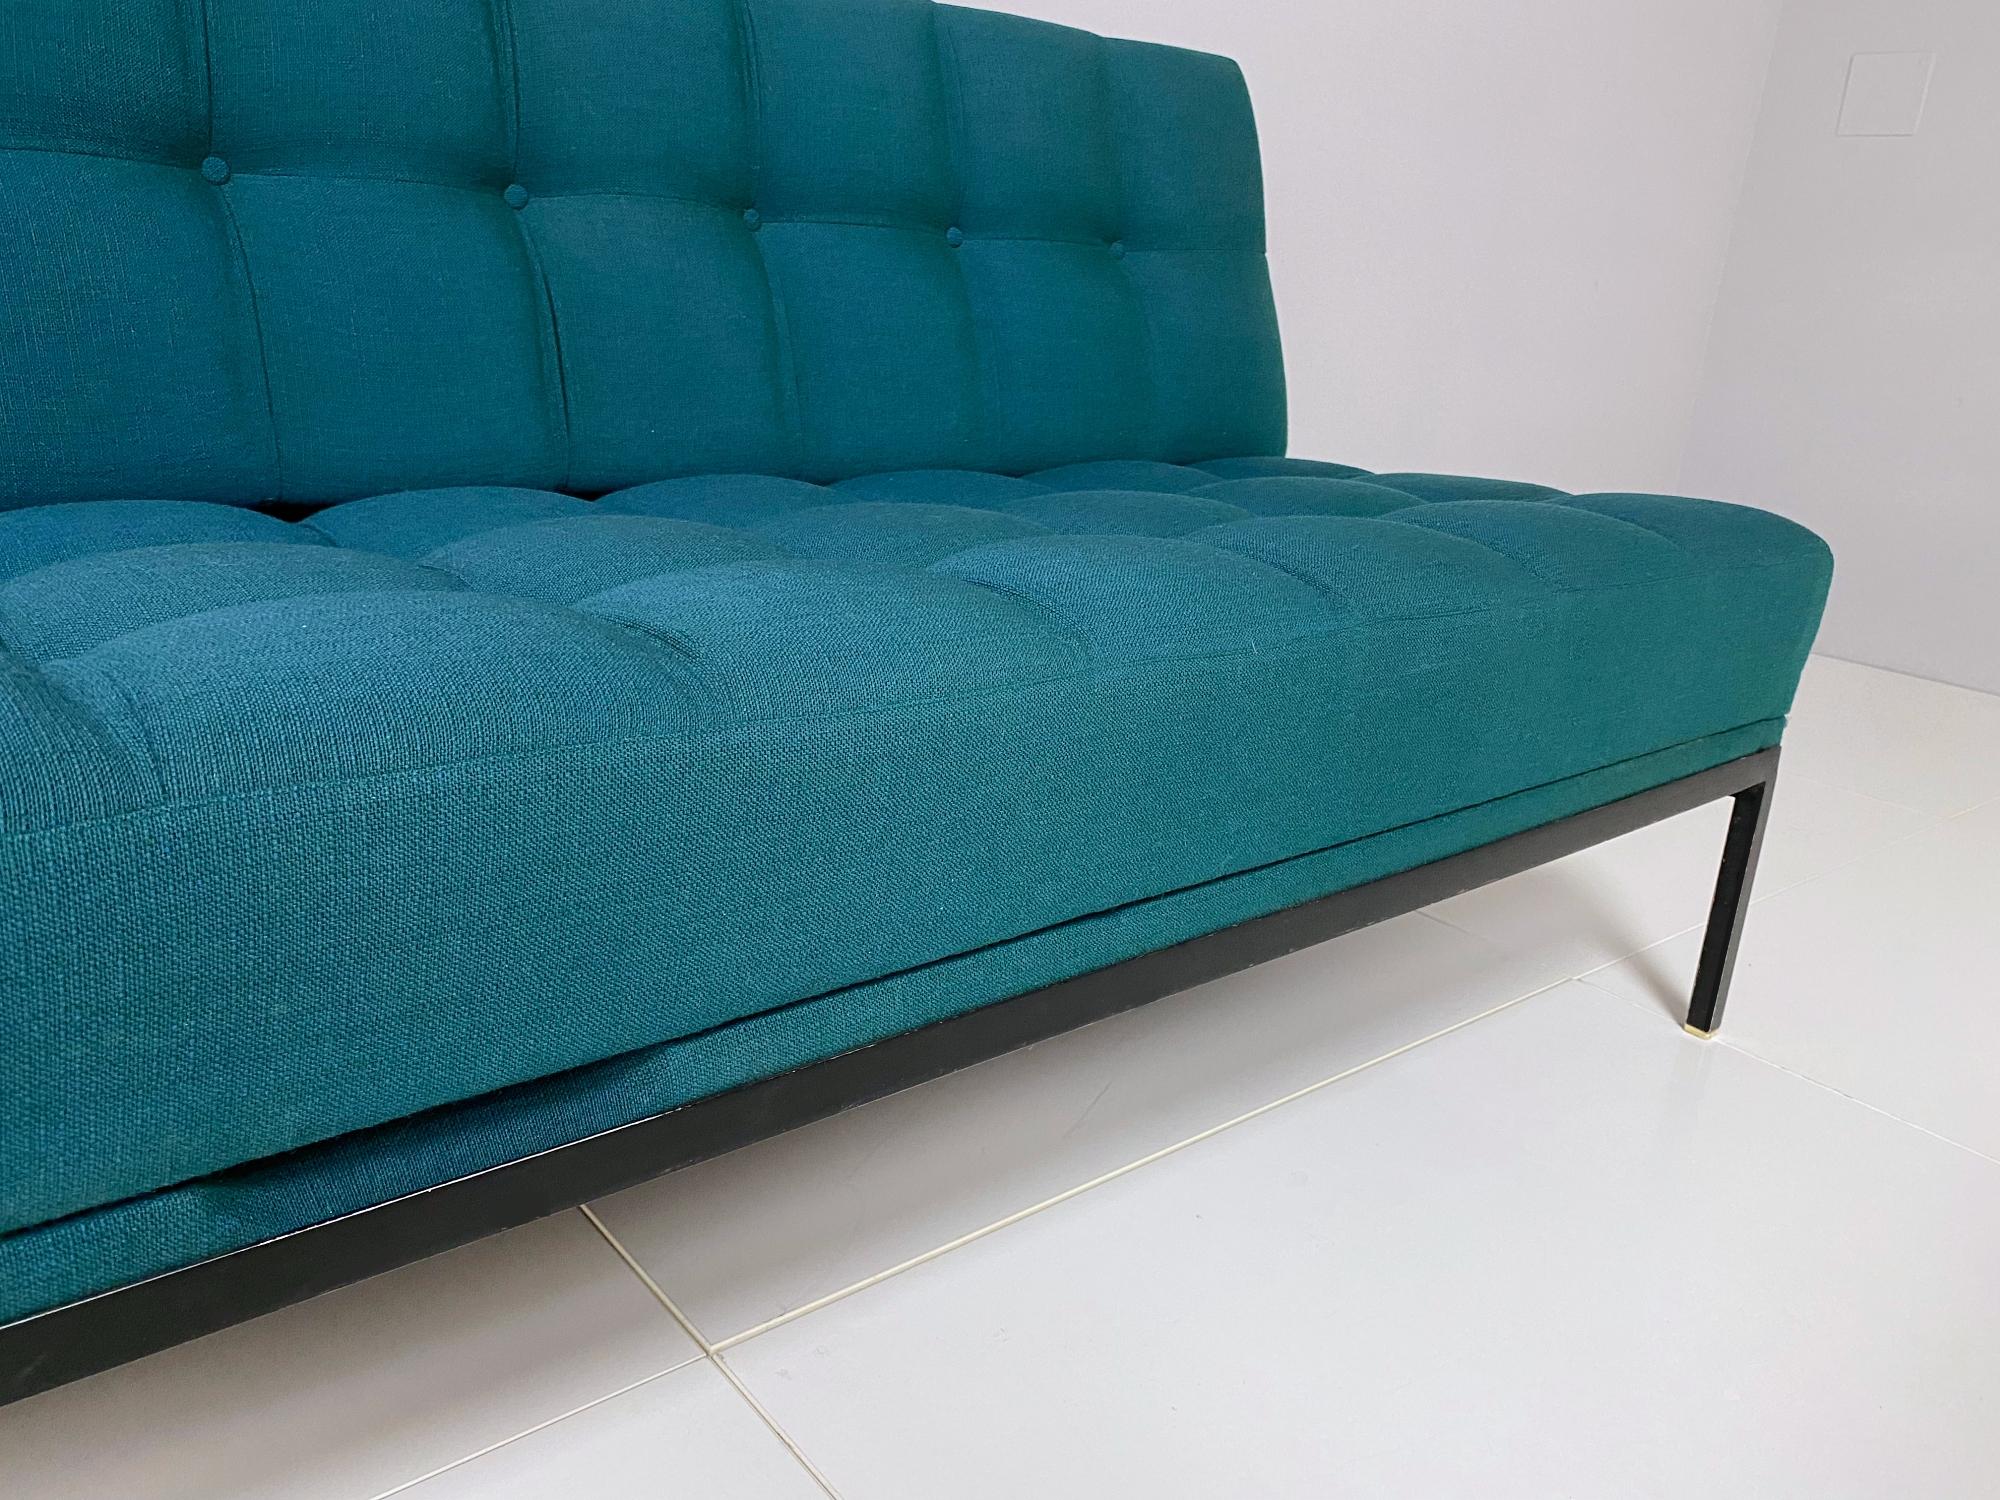 Wool Wittmann Constanze Tufted Midcentury Sofa & Chairs by J. Spalt, 1970s, Austria For Sale